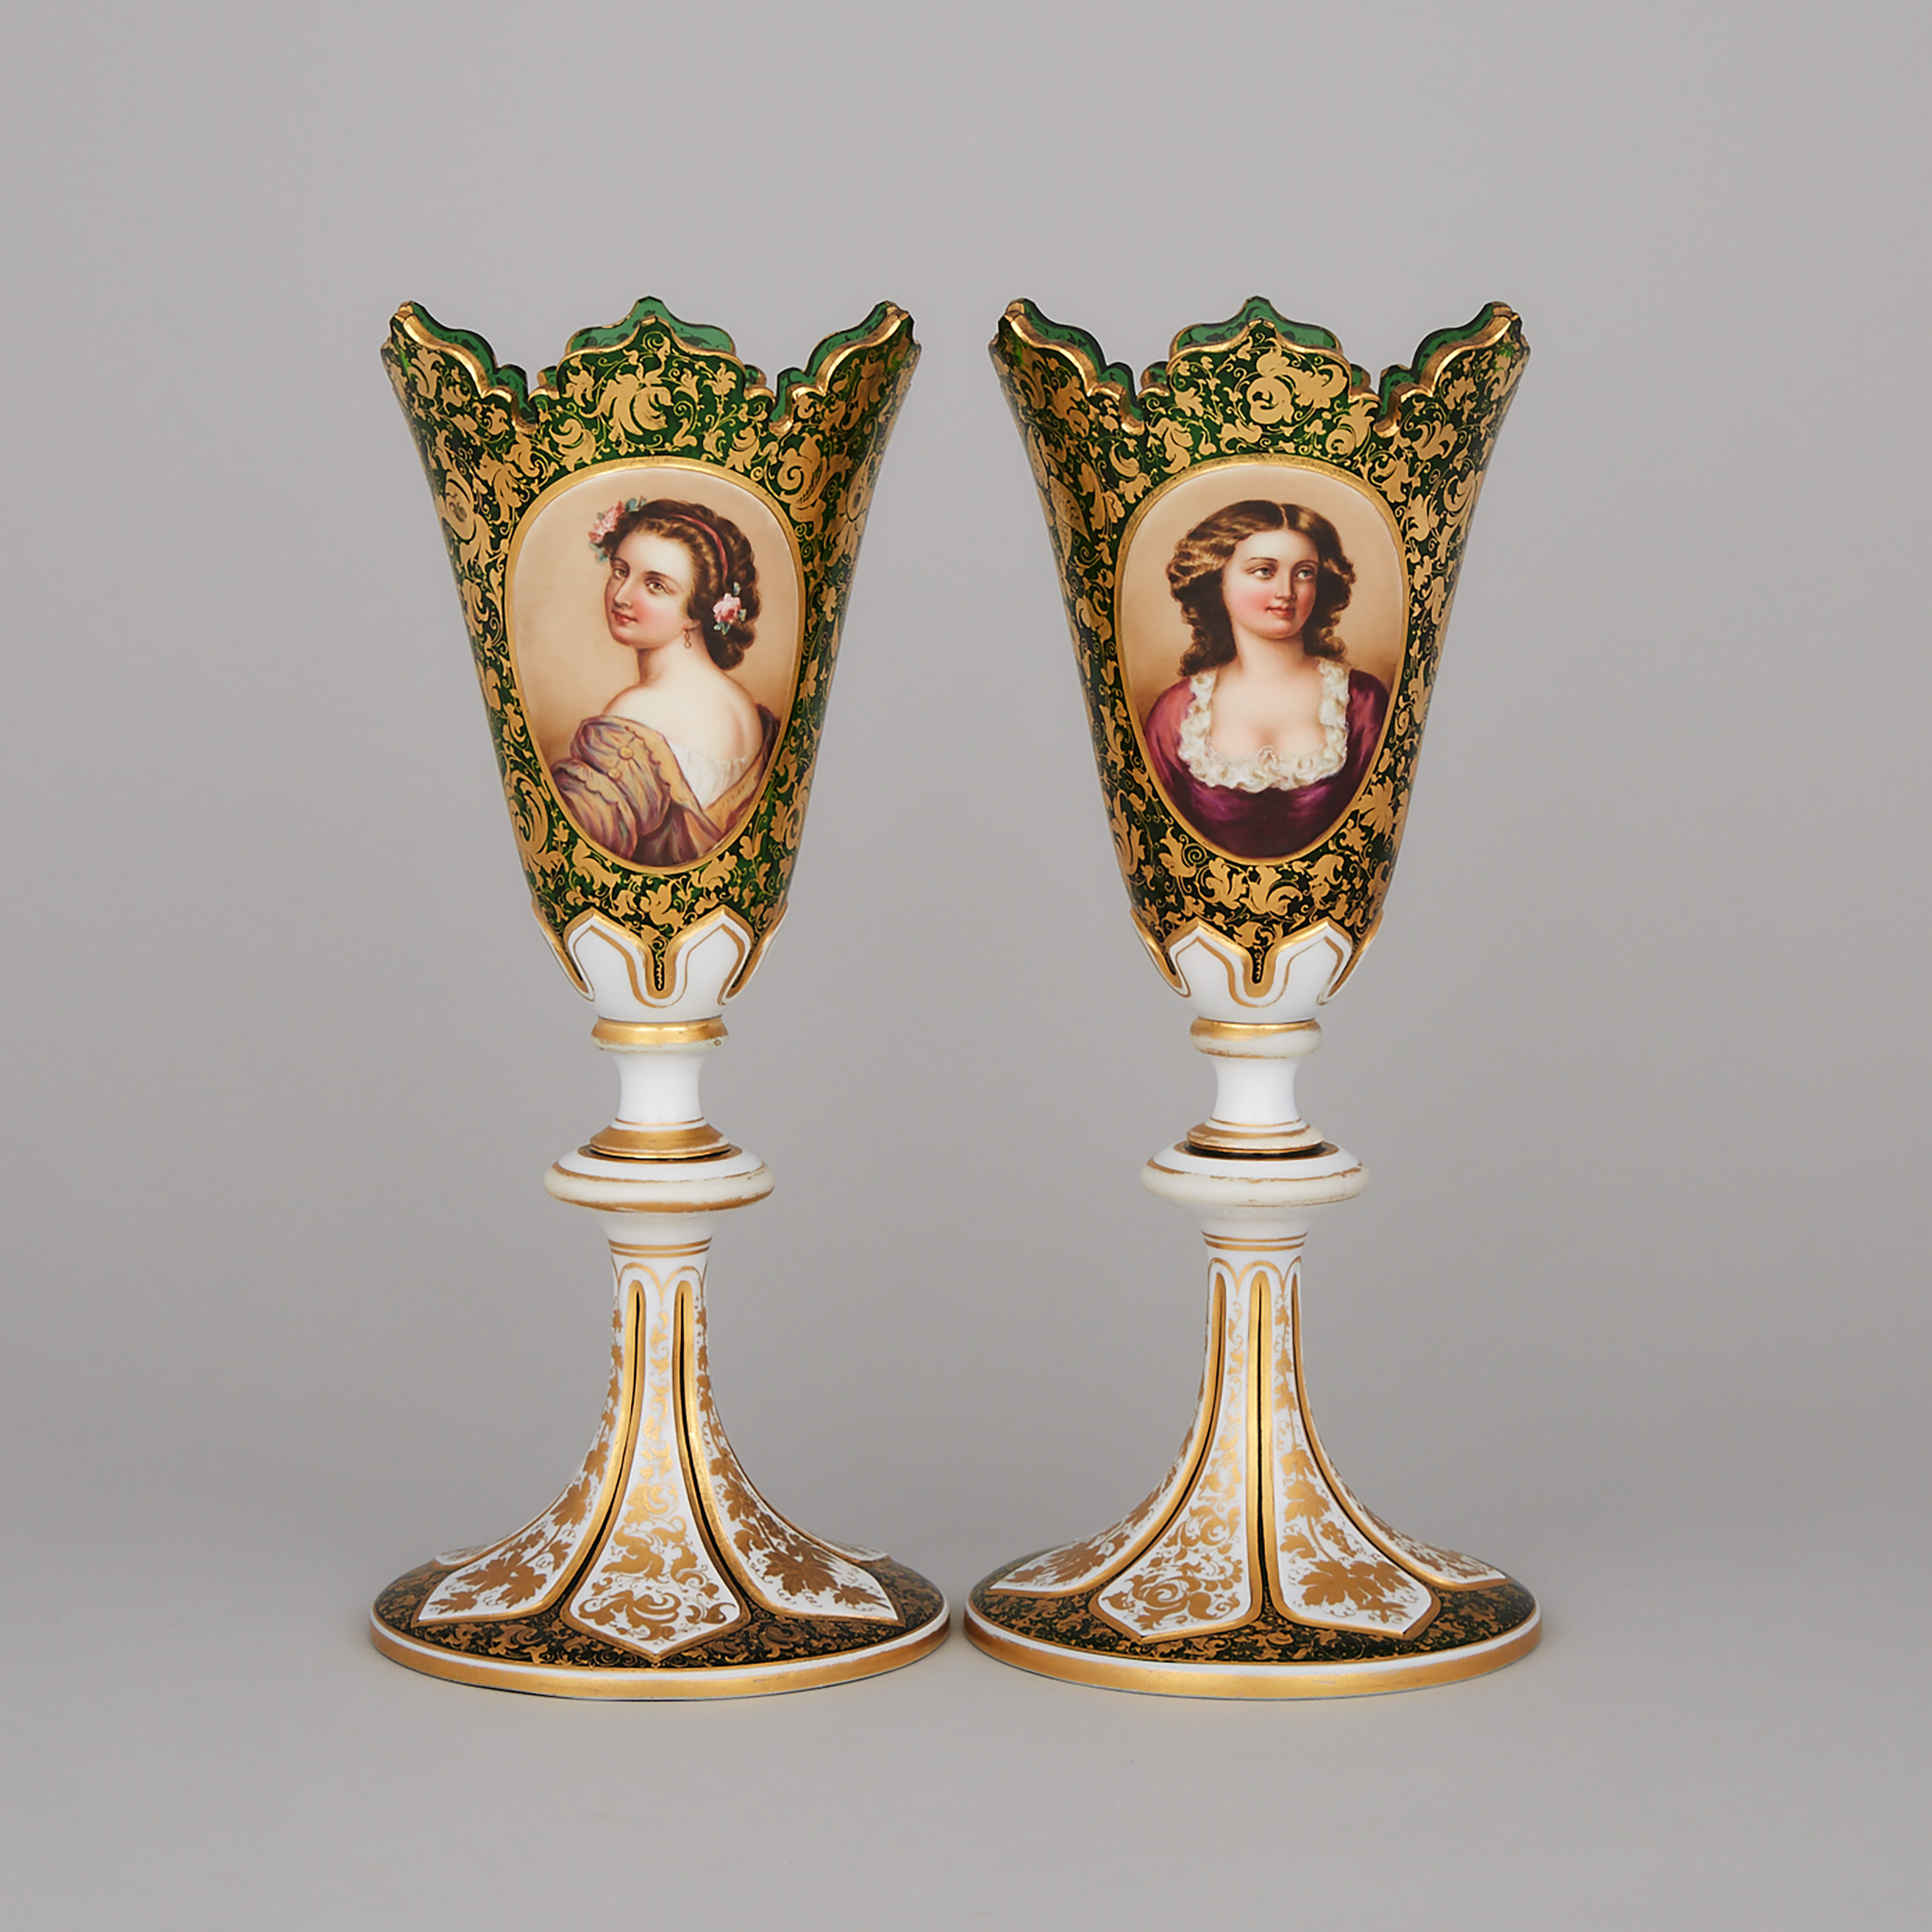 Pair of Bohemian Green and Gilt Glass Enameled Portrait Vases, late 19th century